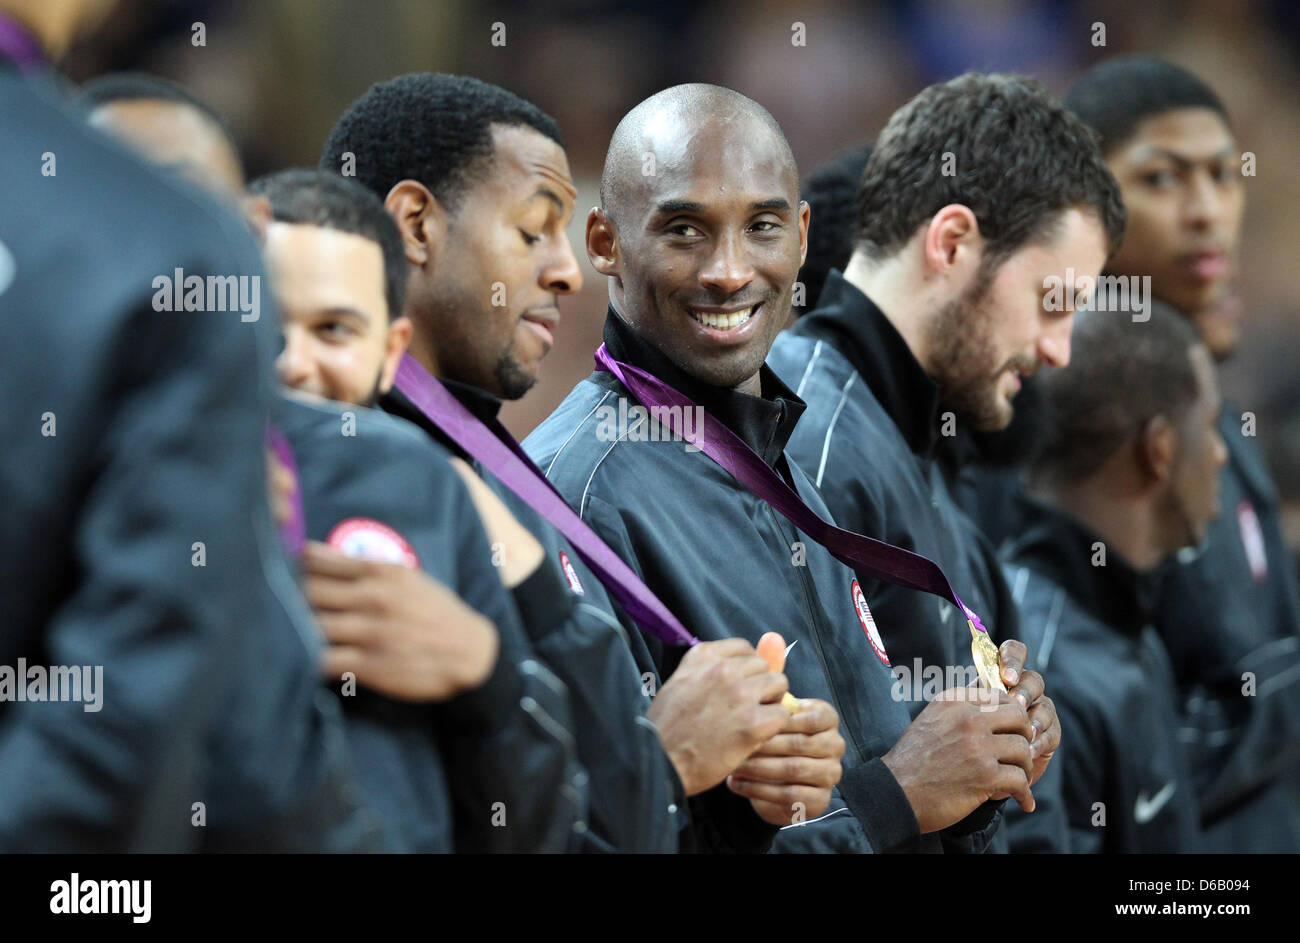 Andre Iguodala (L-R), Kobe Bryant and Kevin Love of the United States celebrate their gold medals during the medal ceremony after winning the basketball final game against Spain in North Greenwich Arena at the London 2012 Olympic Games, London, Great Britain, 12 August 2012. Photo: Friso Gentsch dpa  +++(c) dpa - Bildfunk+++ Stock Photo